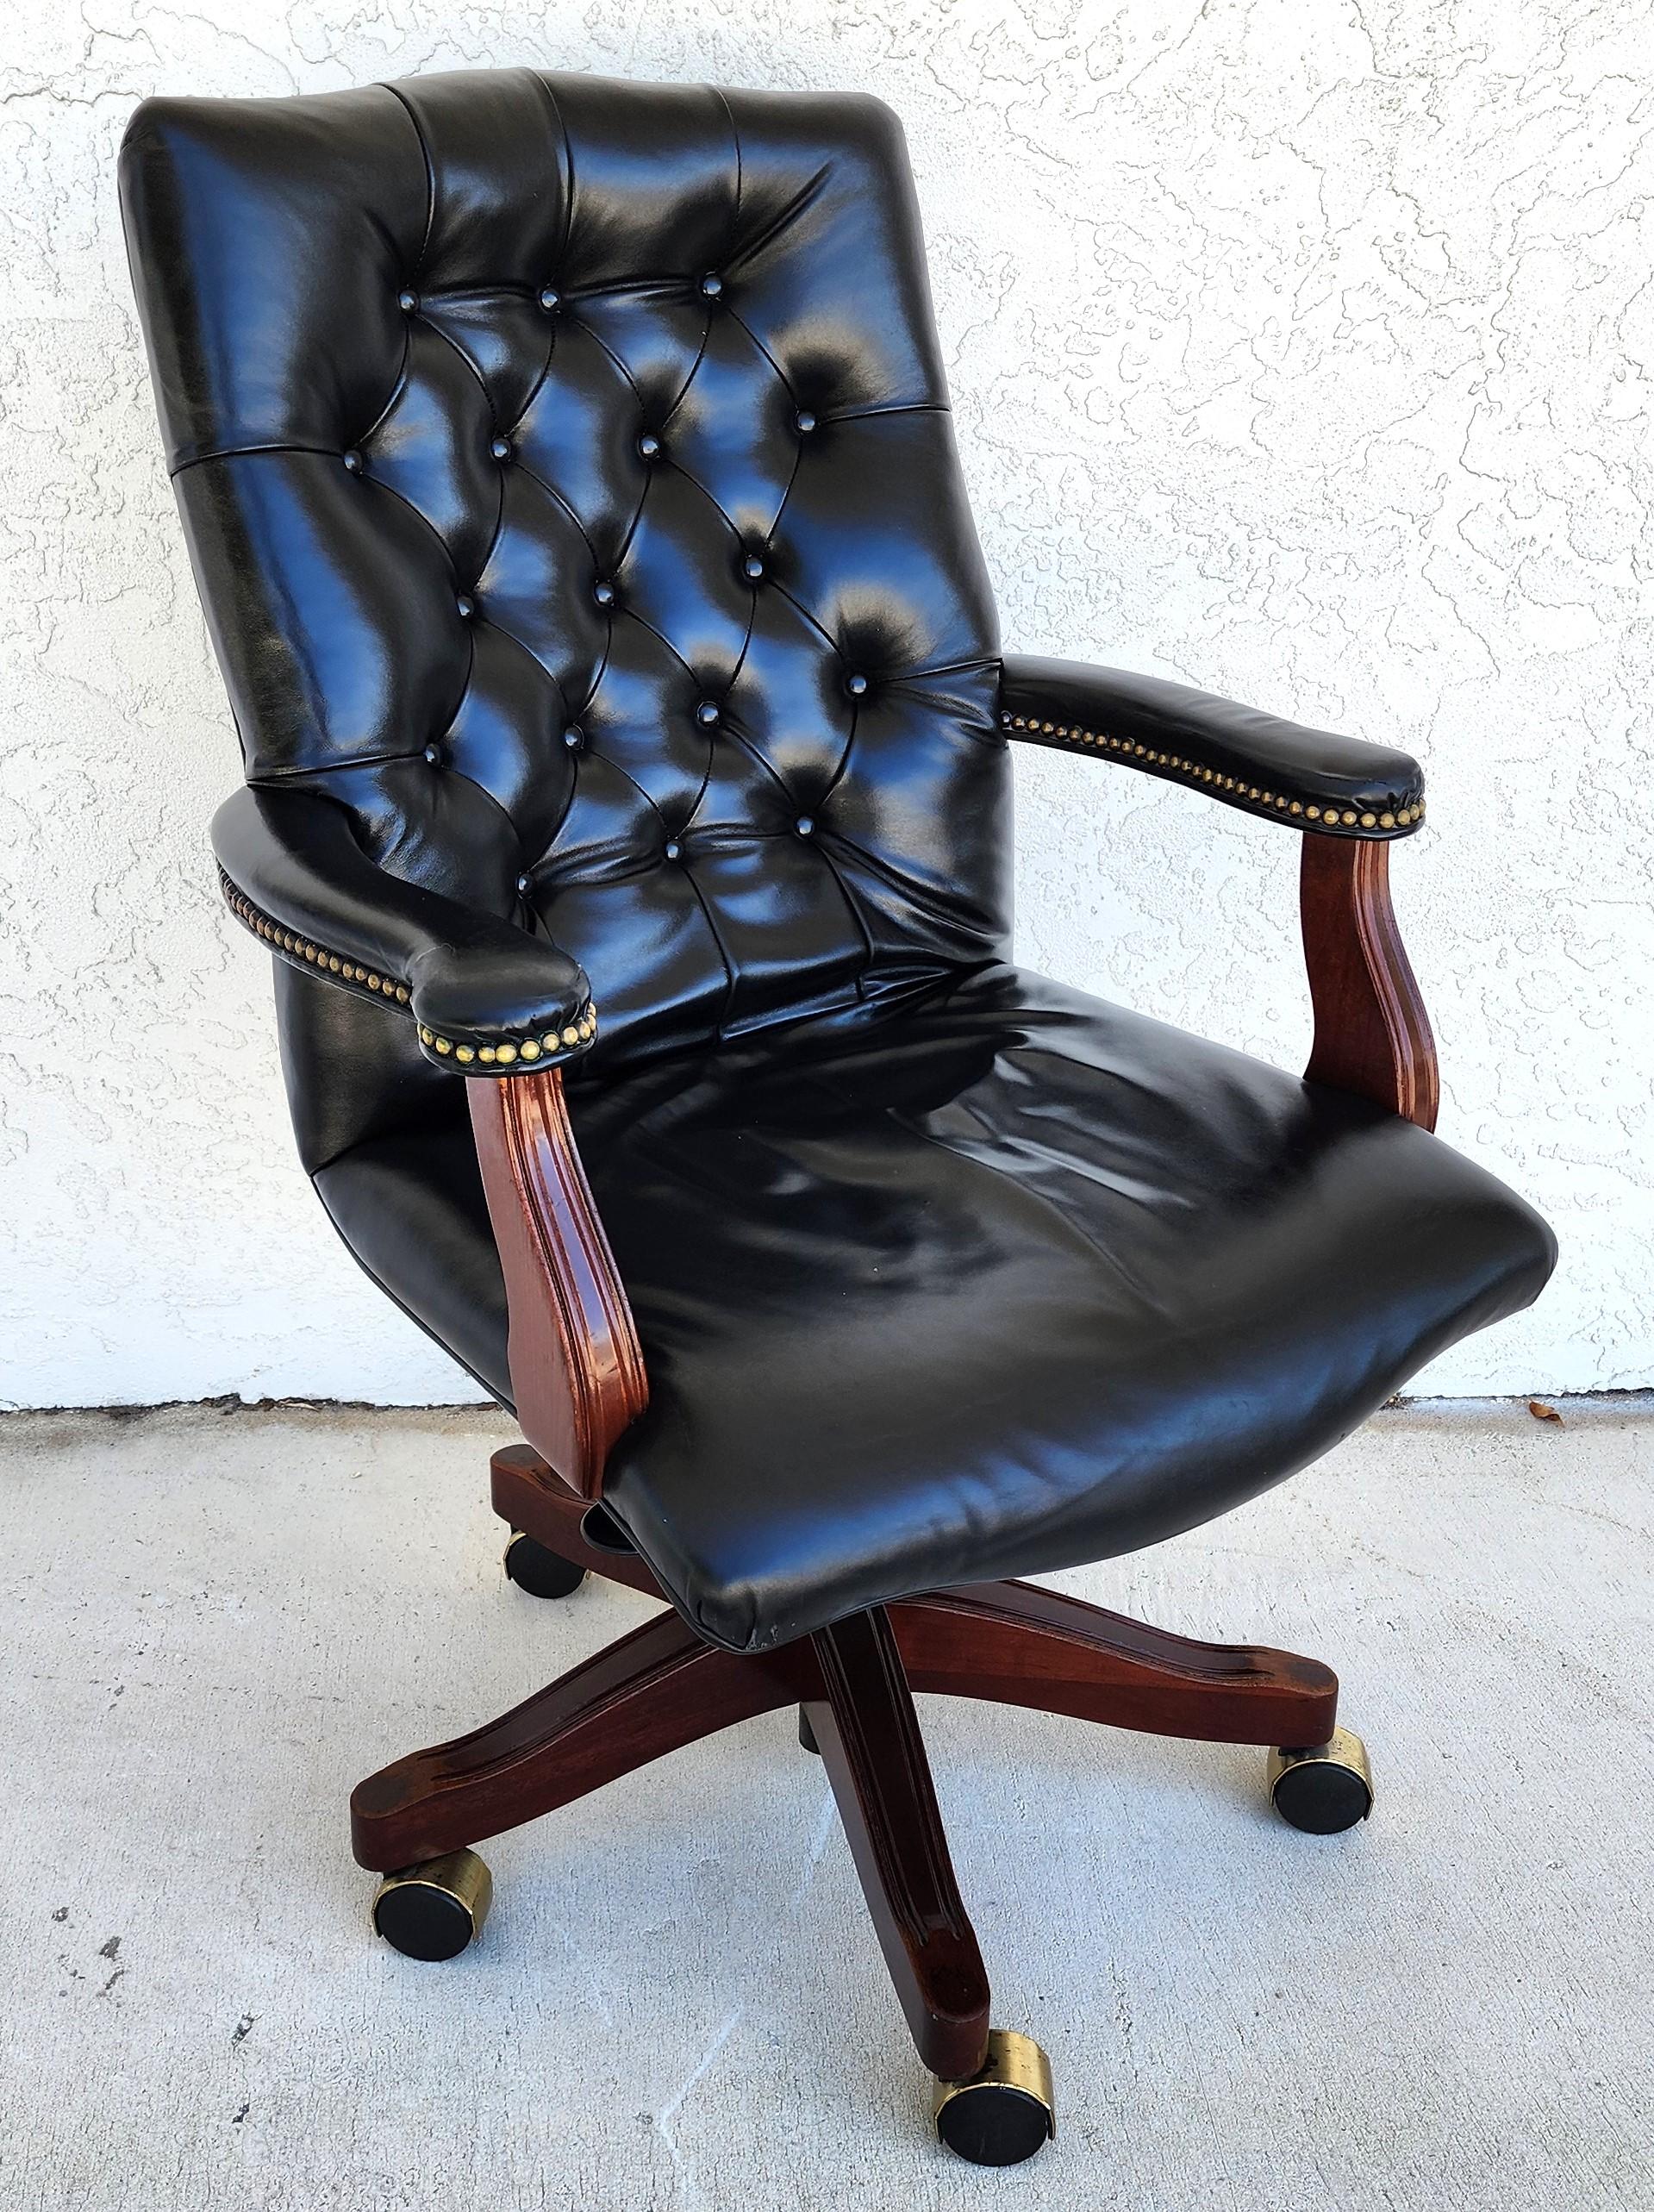 For FULL item description click on CONTINUE READING at the bottom of this page.

Offering One Of Our Recent Palm Beach Estate Fine Furniture Acquisitions Of A
Classic Vintage MCM Black Leather Swivel Office Chair by GUNLOCKE
Featuring an adjustable